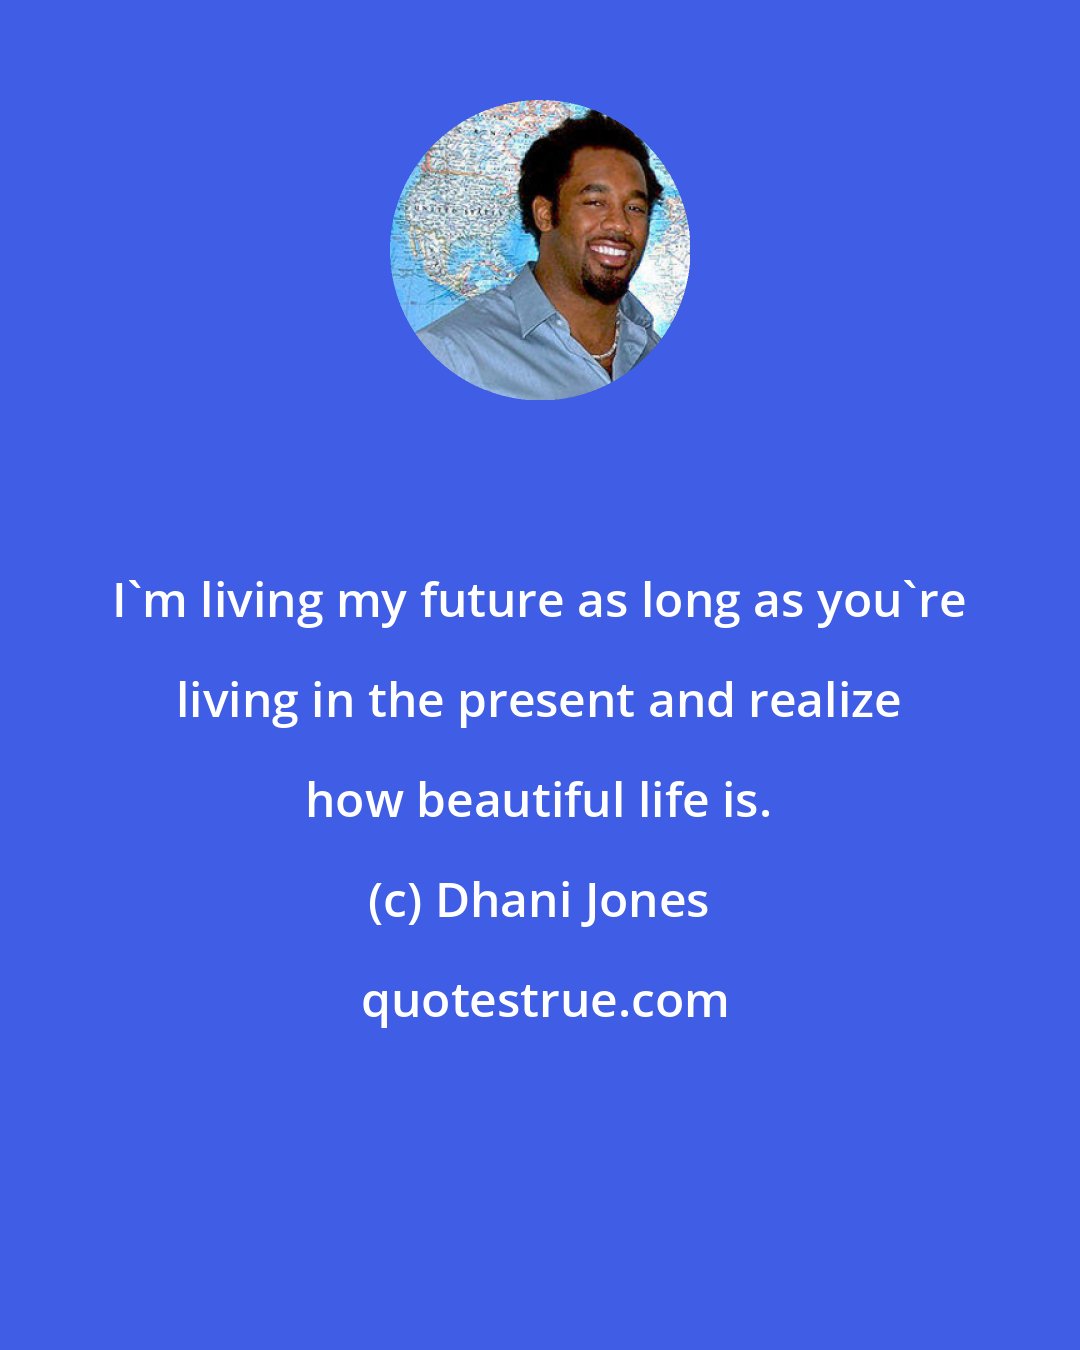 Dhani Jones: I'm living my future as long as you're living in the present and realize how beautiful life is.